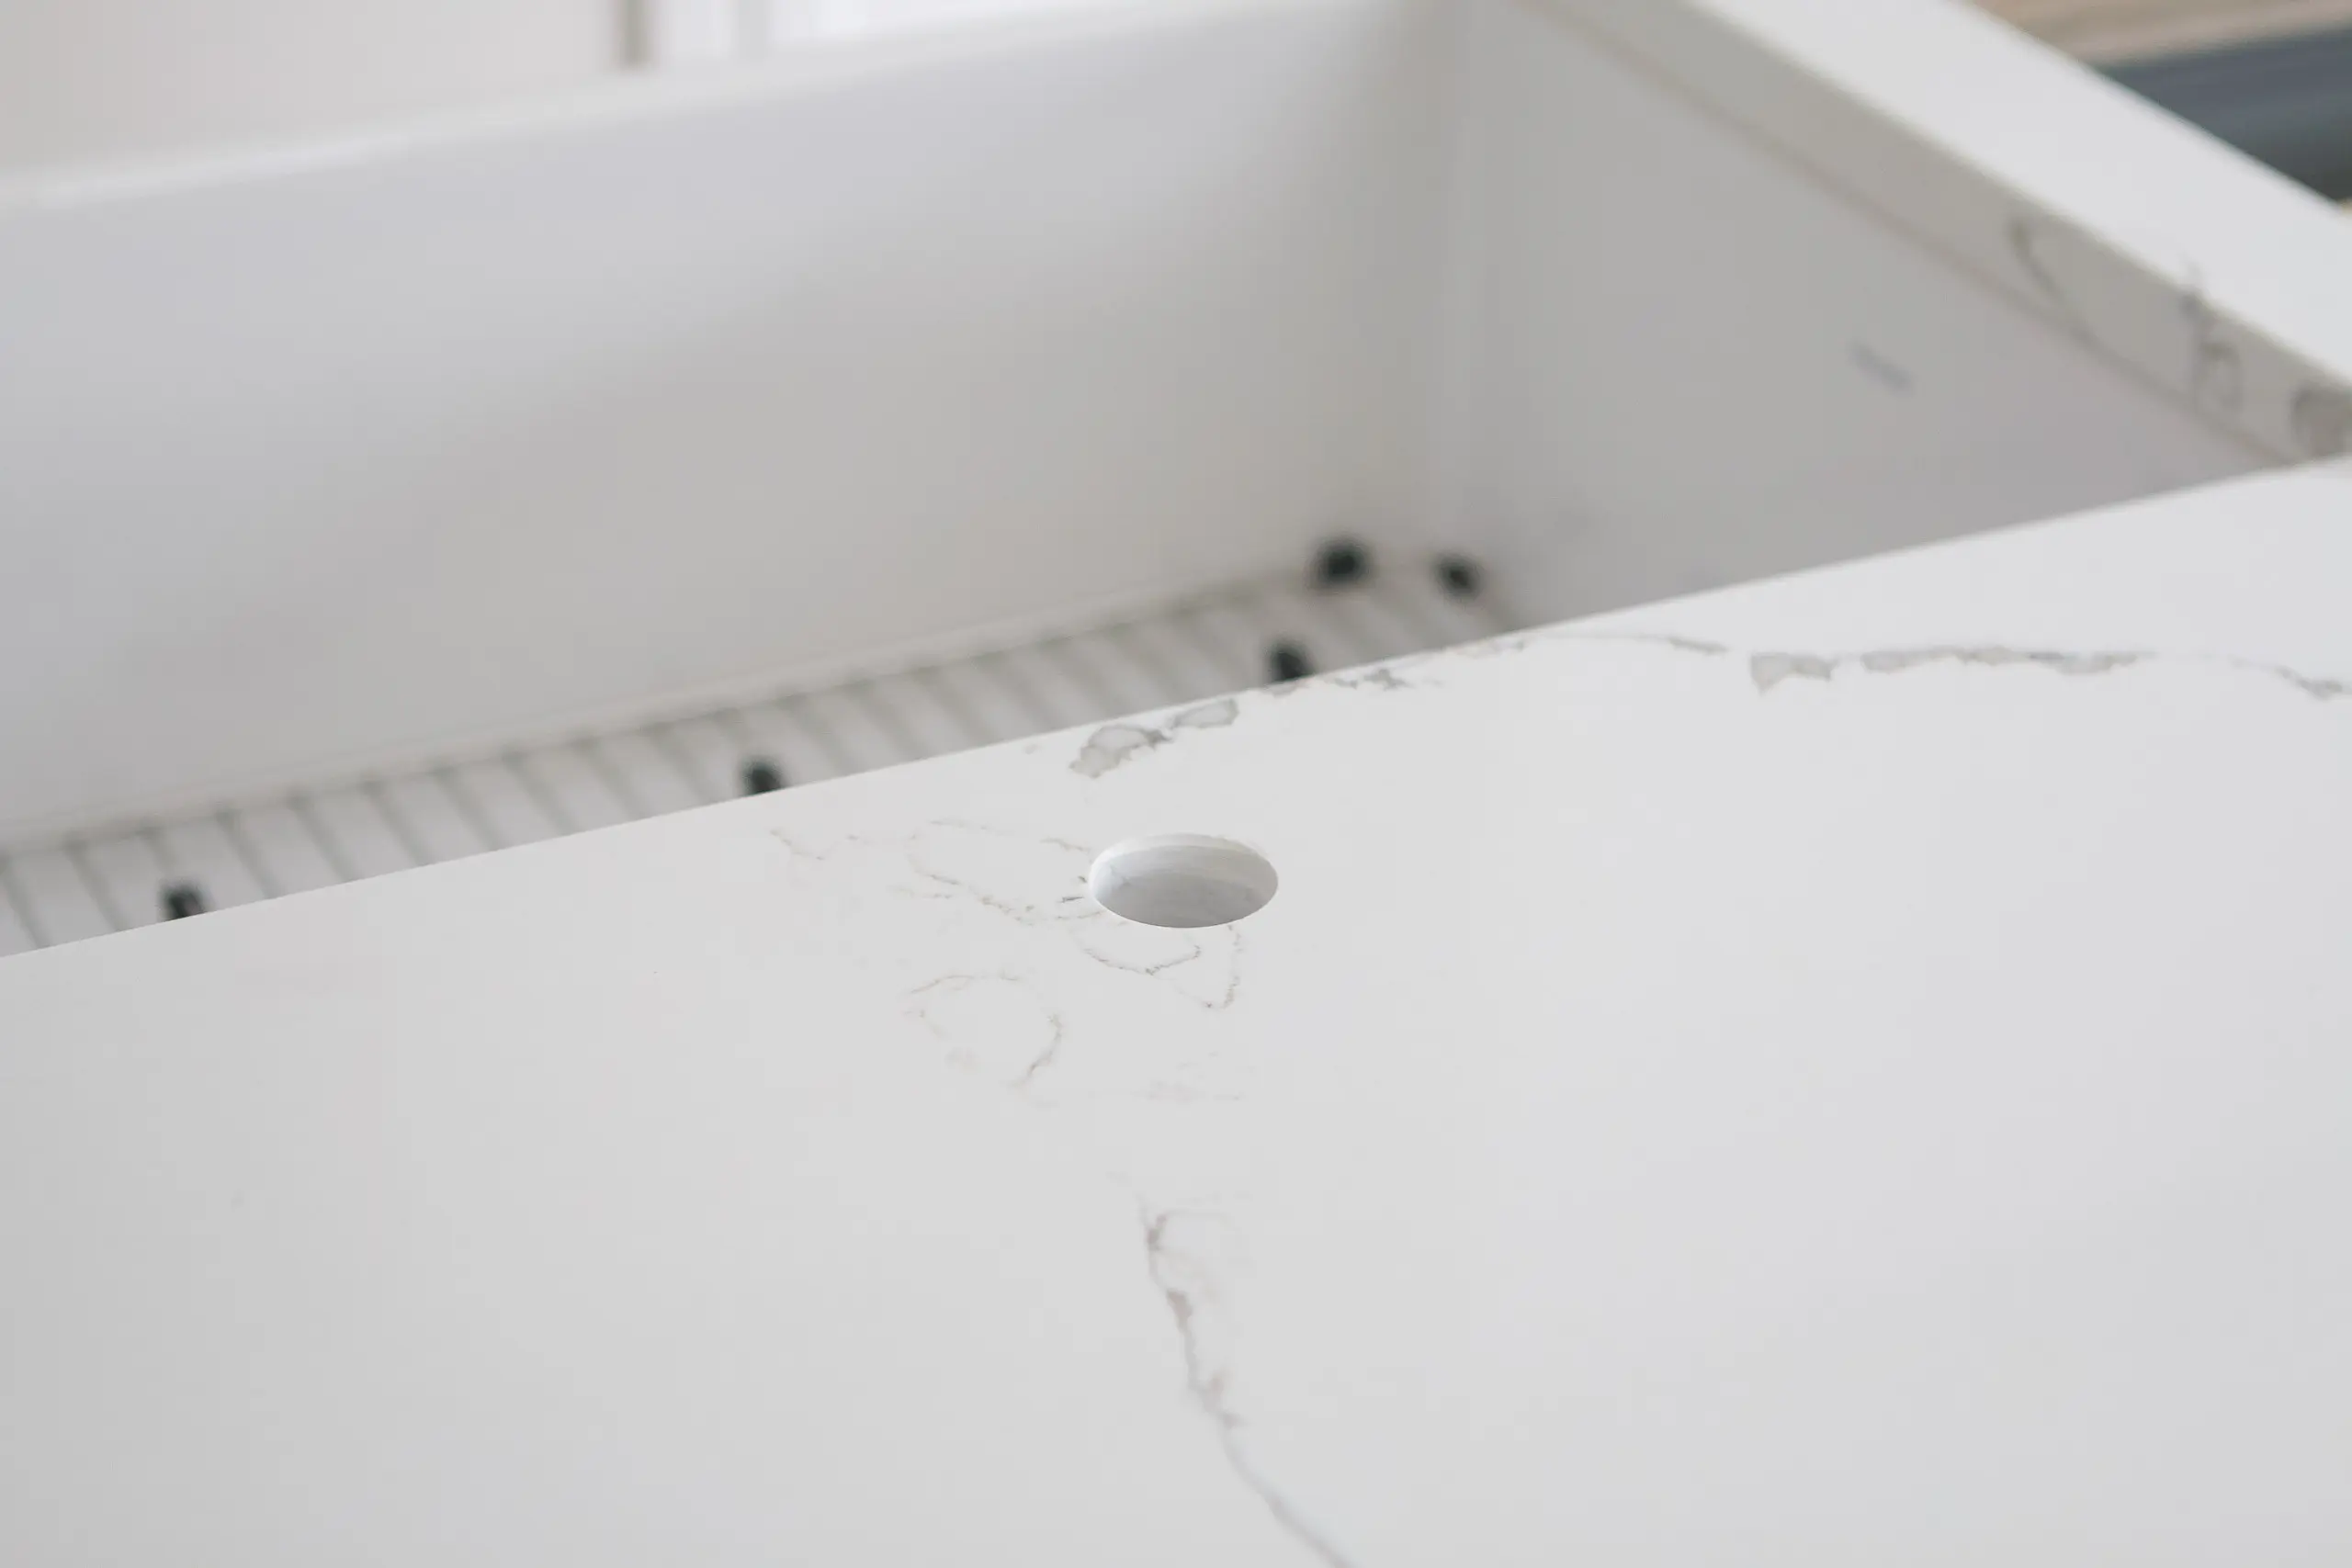 Cutting hole for faucet in quartz countertops